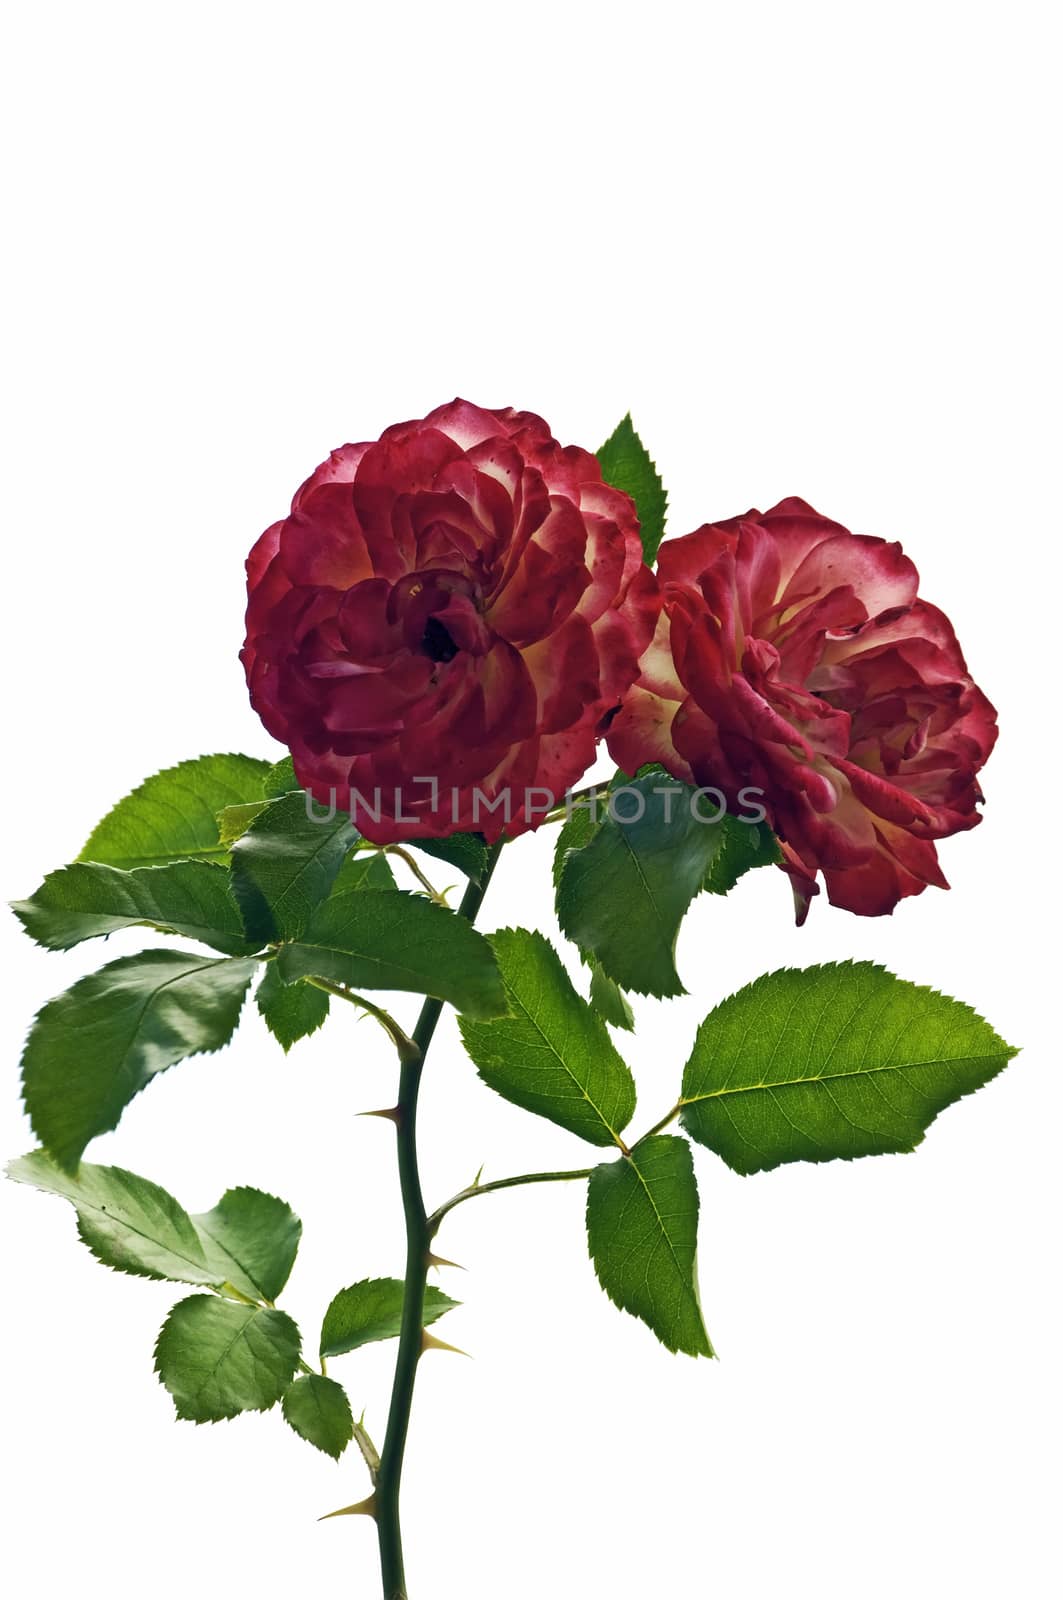 Two red roses share a single stem against an isolated white background